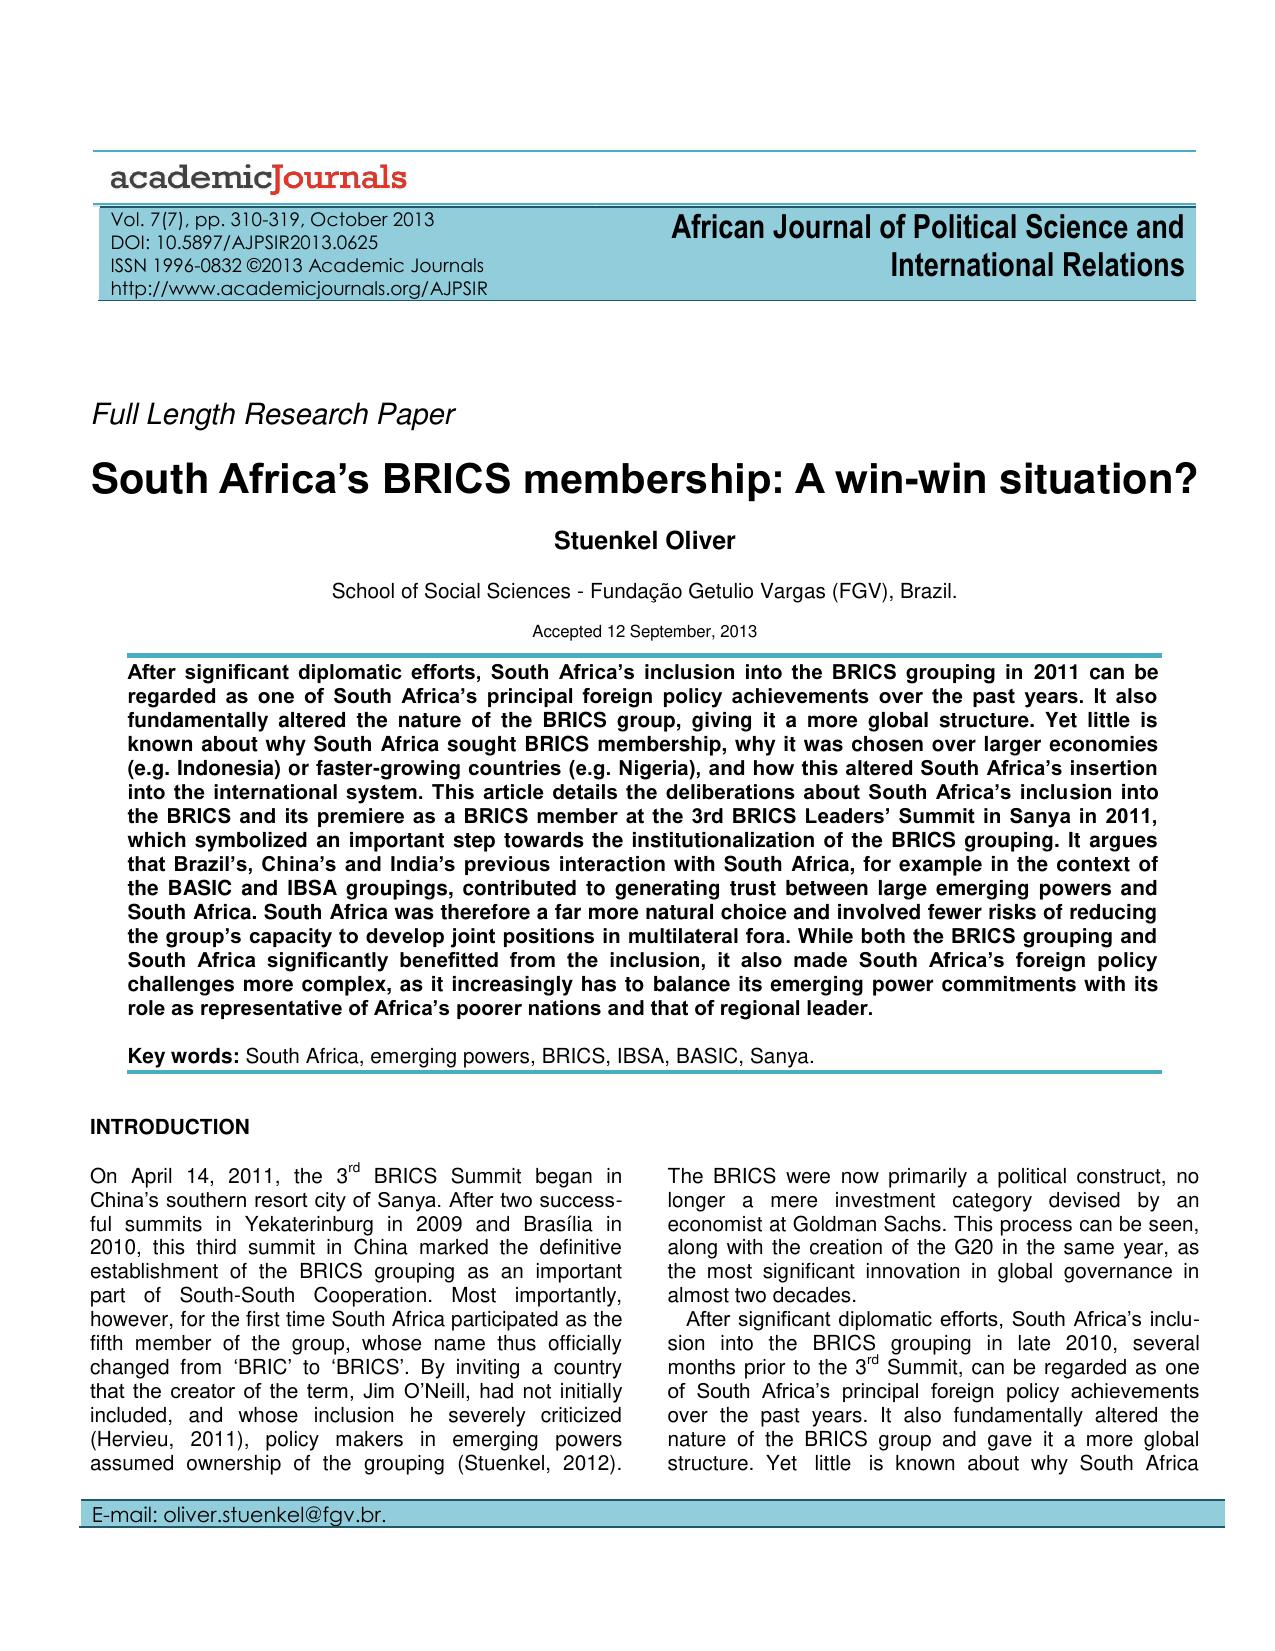 South Africa’s BRICS membership A win-win situation 2013